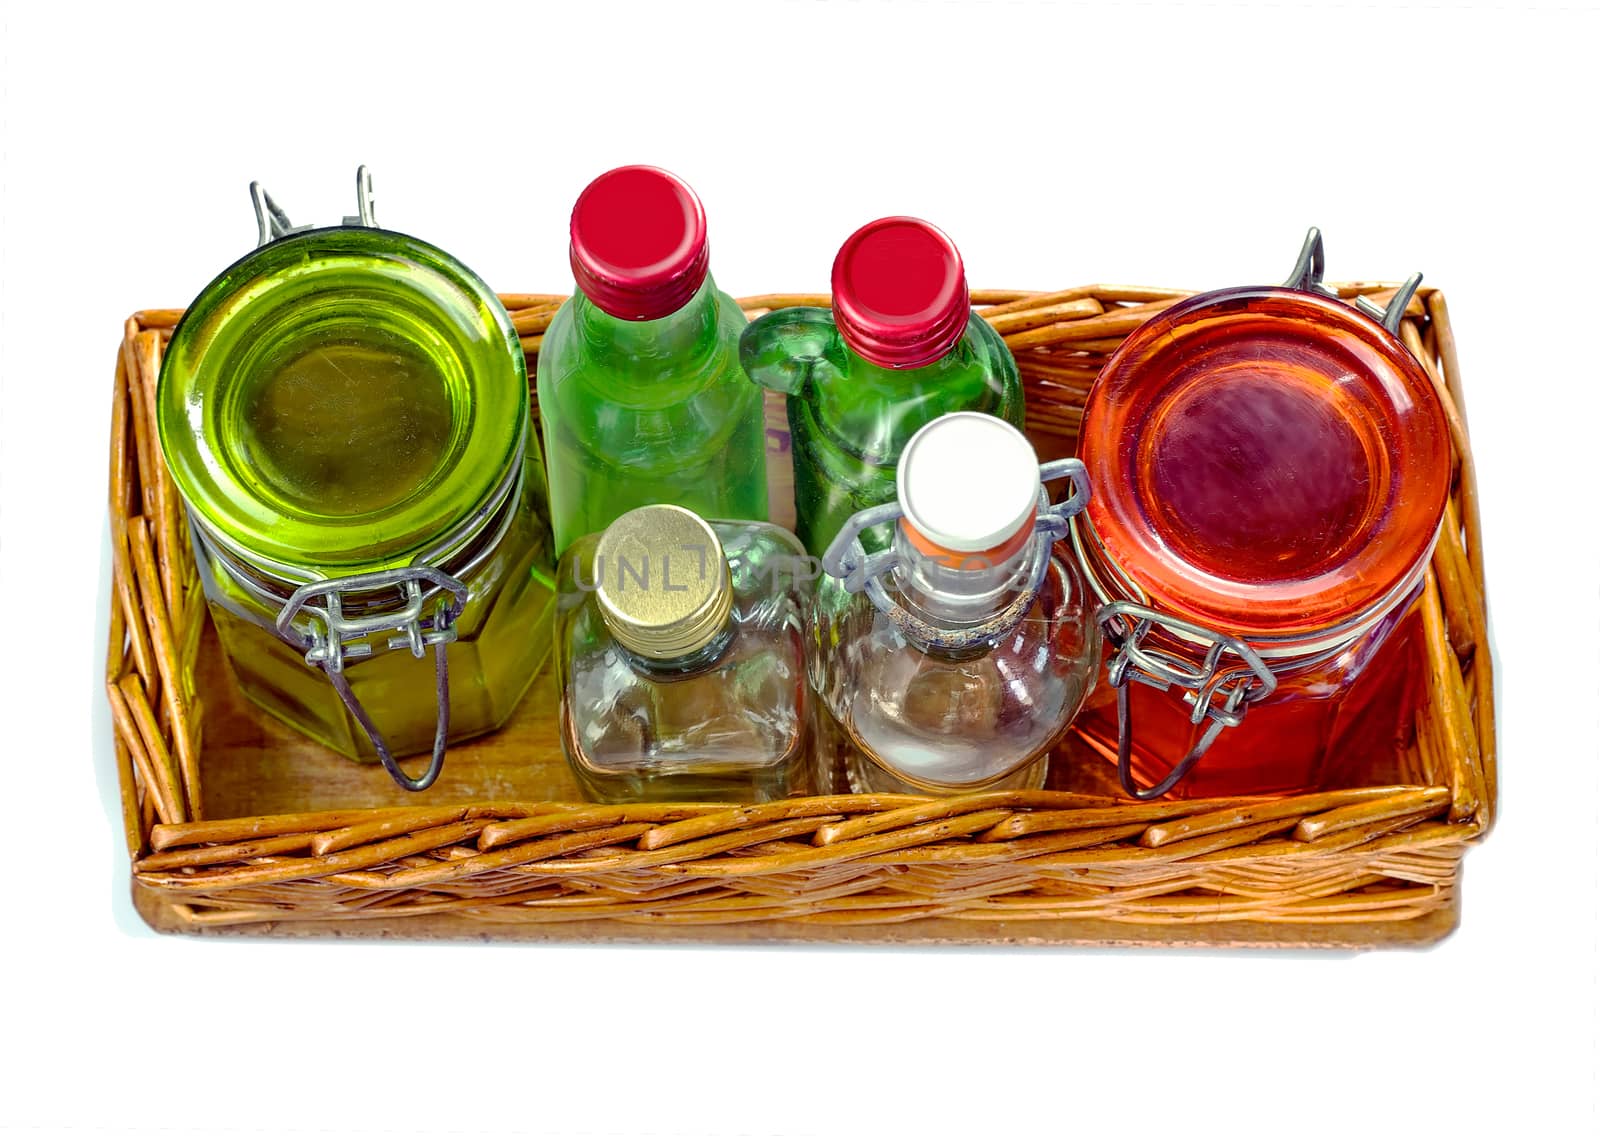 Wicker tray with empty glass jars and little glass bottle, isolated on white background